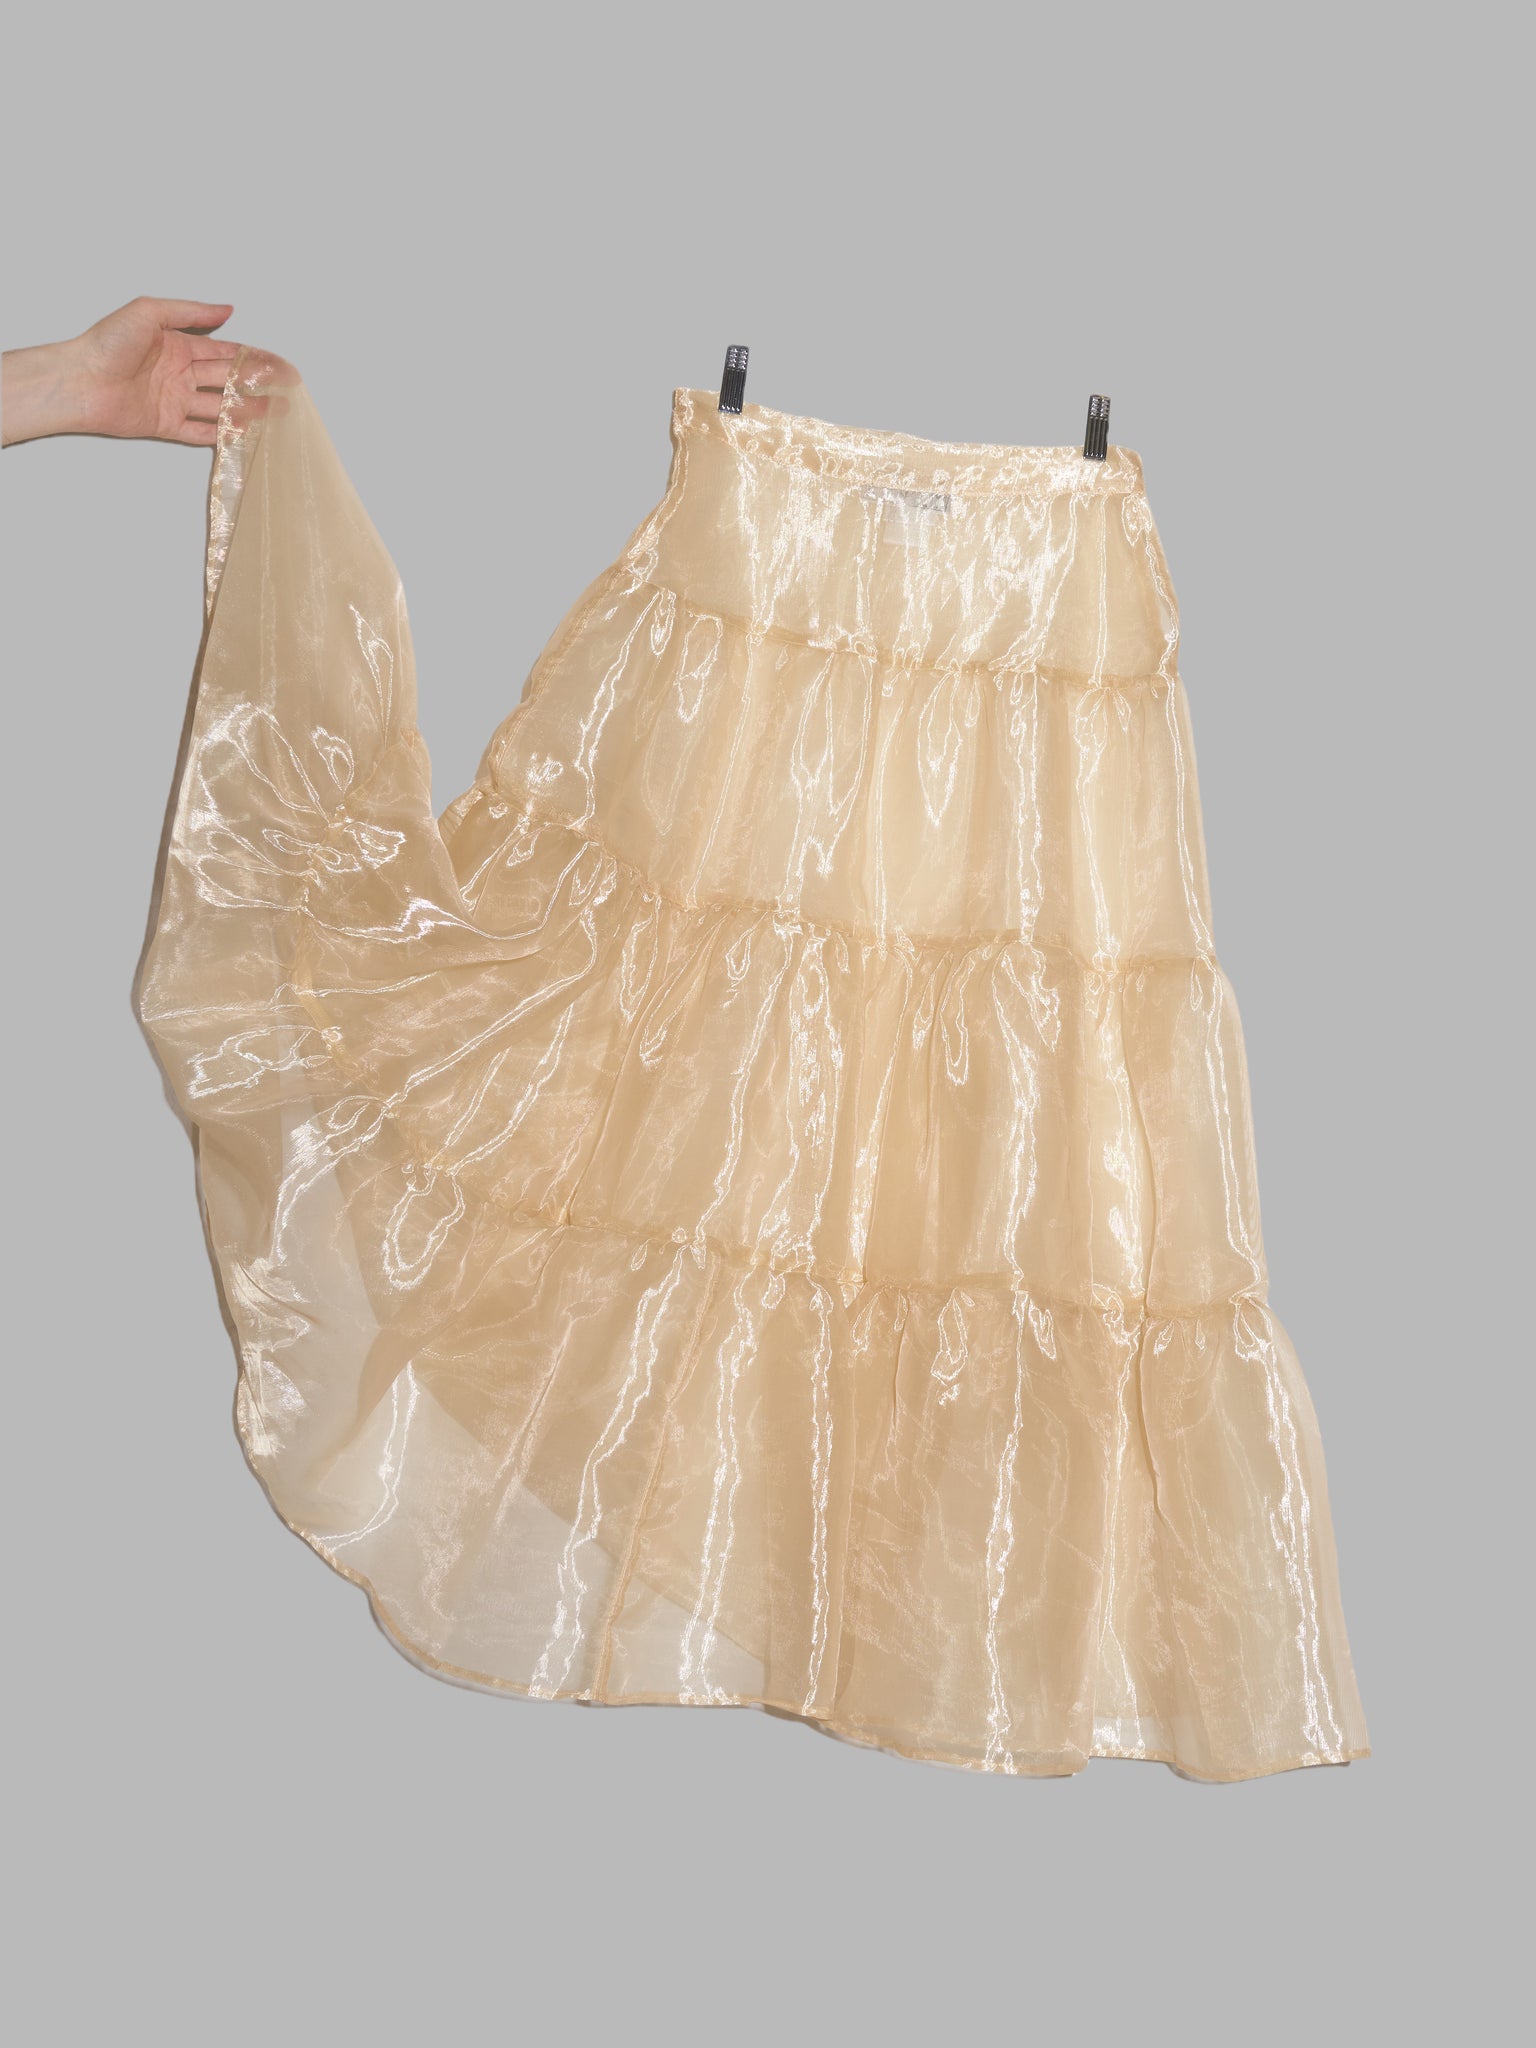 Dexter Wong 1990s gold polyester organza tiered see-through maxi skirt - S